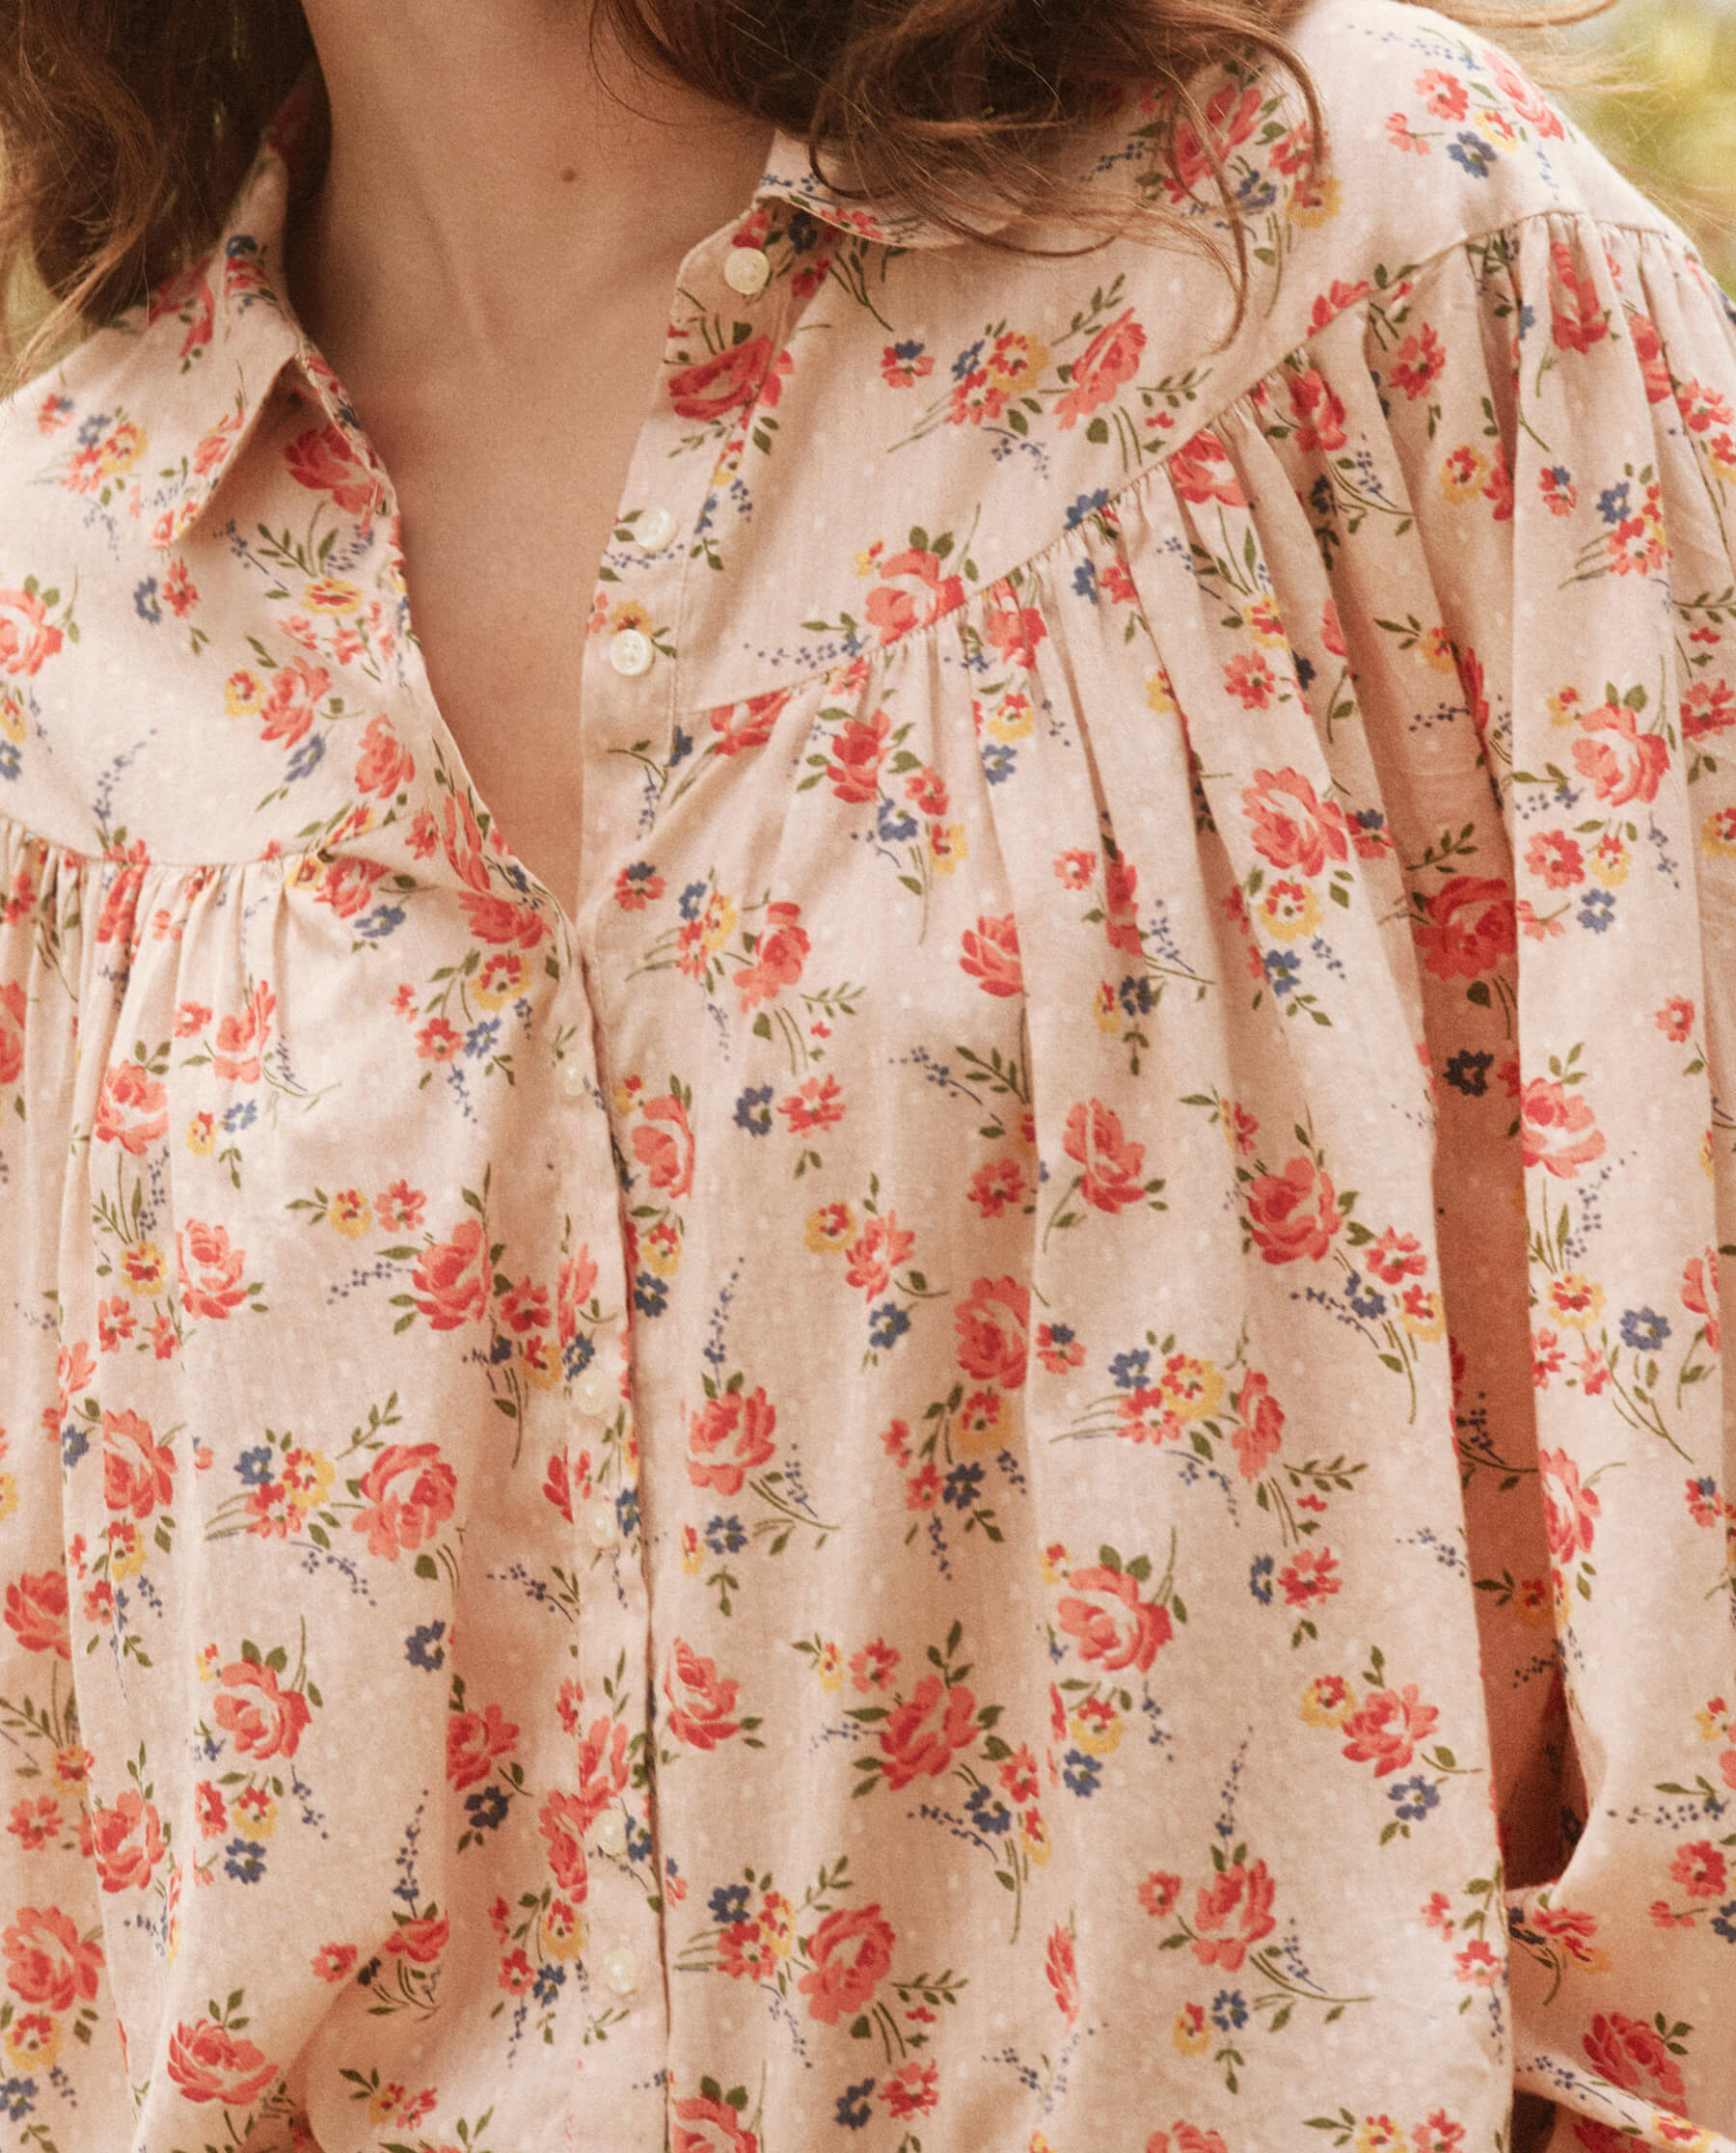 The Carousel Top. -- Pale Pink Kerchief Rose Print